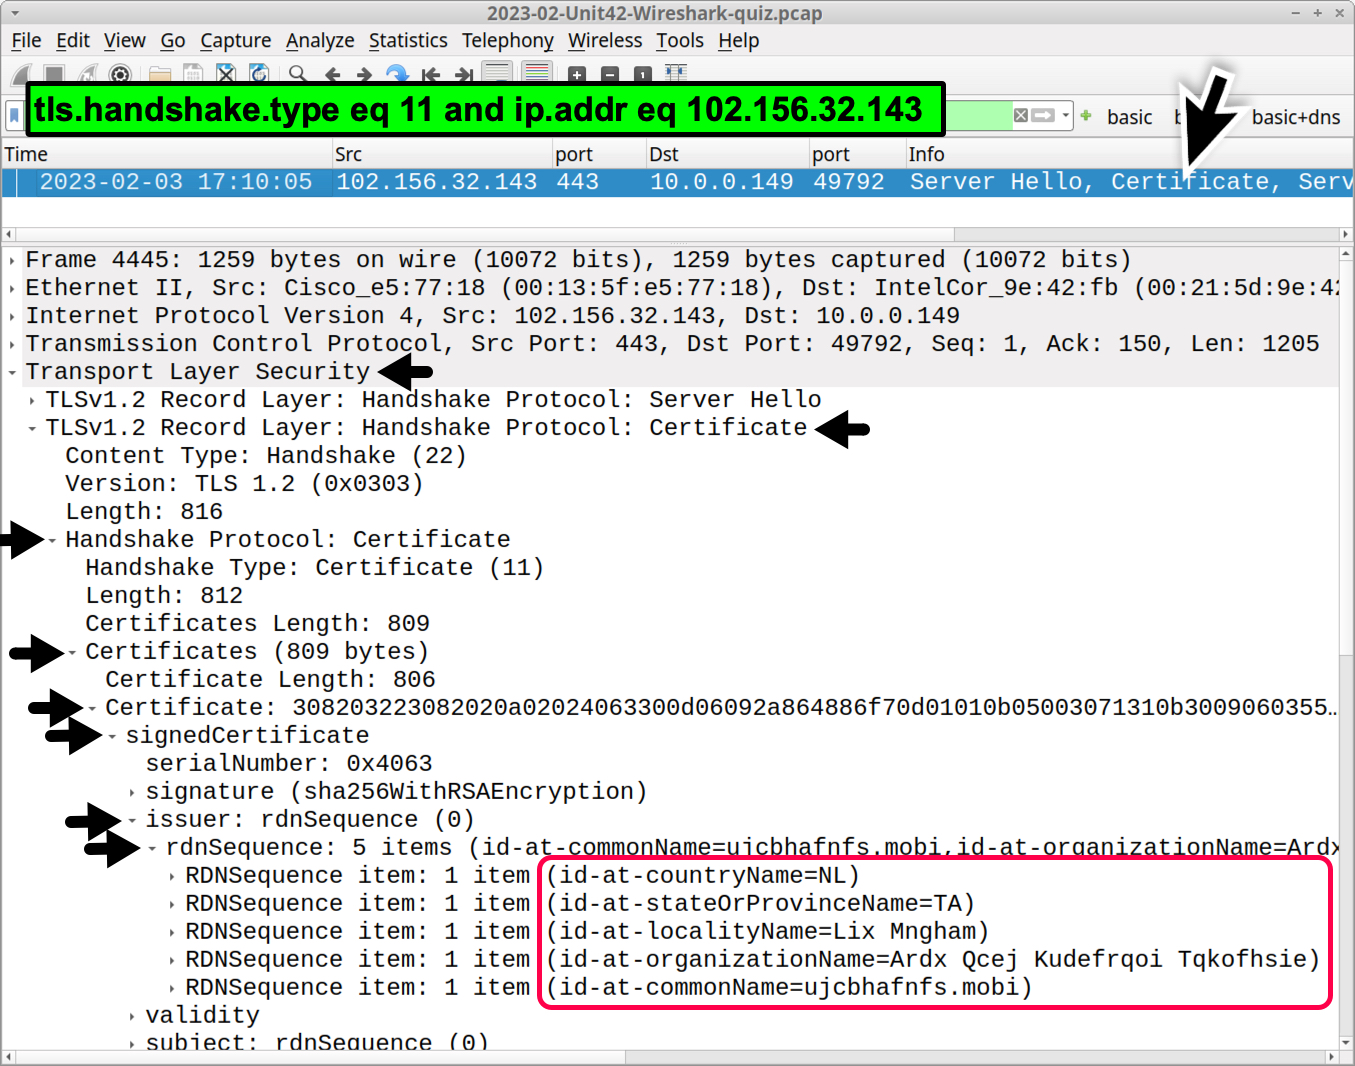 Image 9 is a screenshot of Wireshark highlighting, in red, the rdnSequence section of the certificate issuer data (highlighted with arrows).